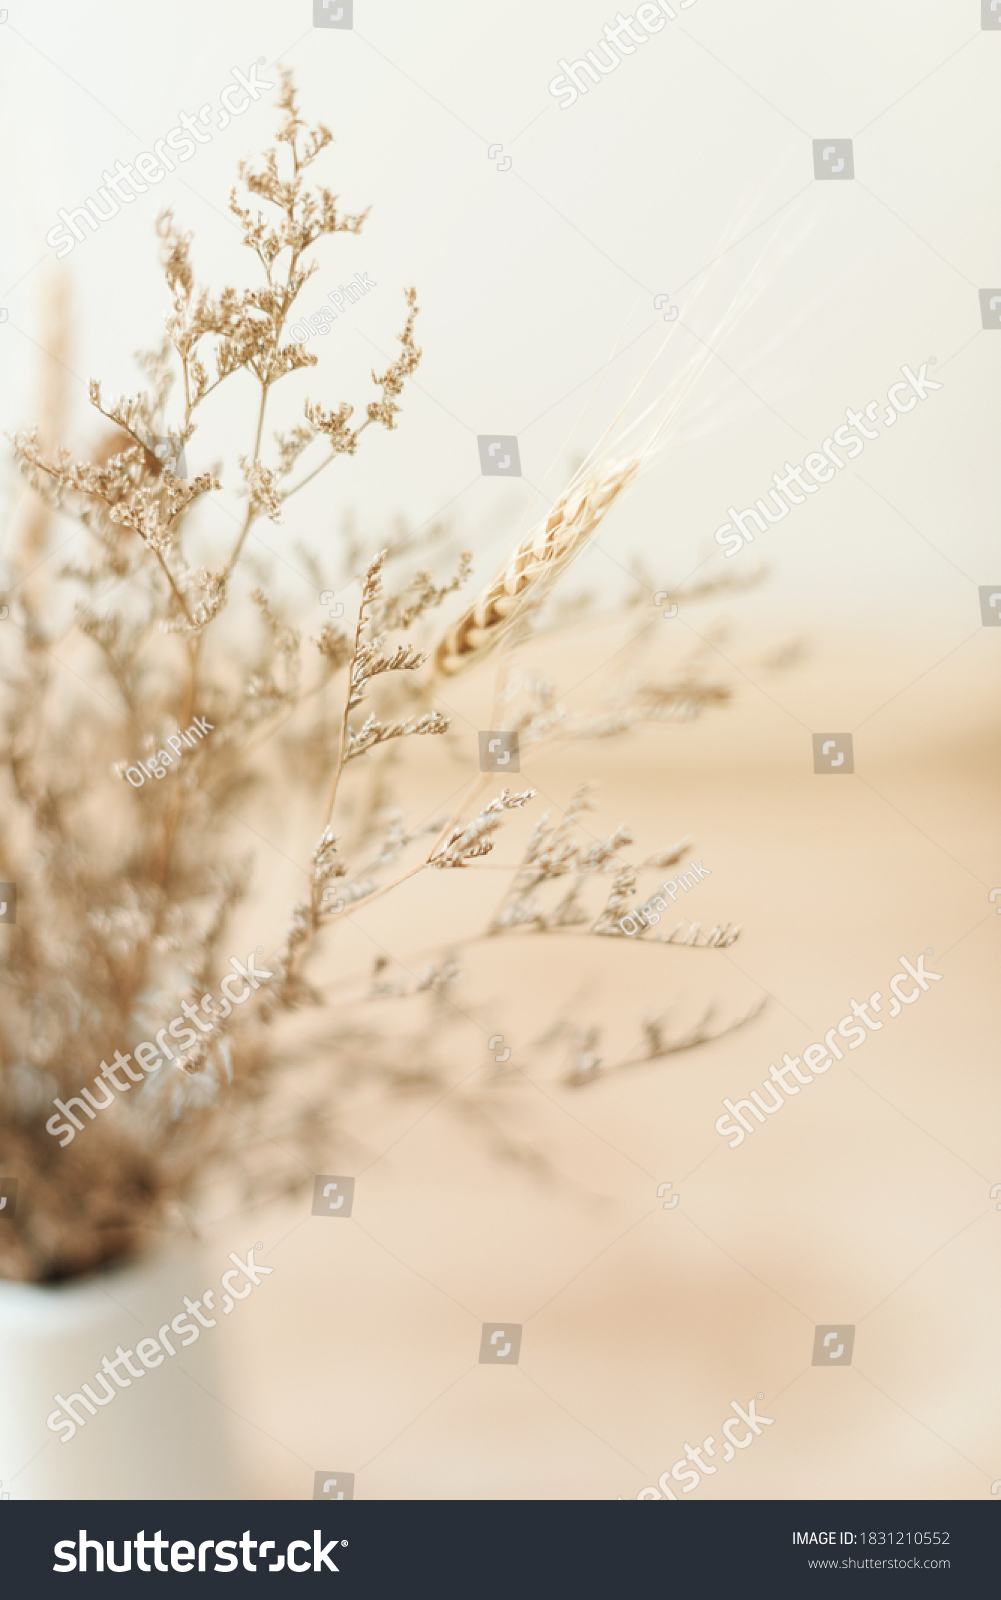 Dried flowers in the vase. kinfolk and minimalism style #1831210552